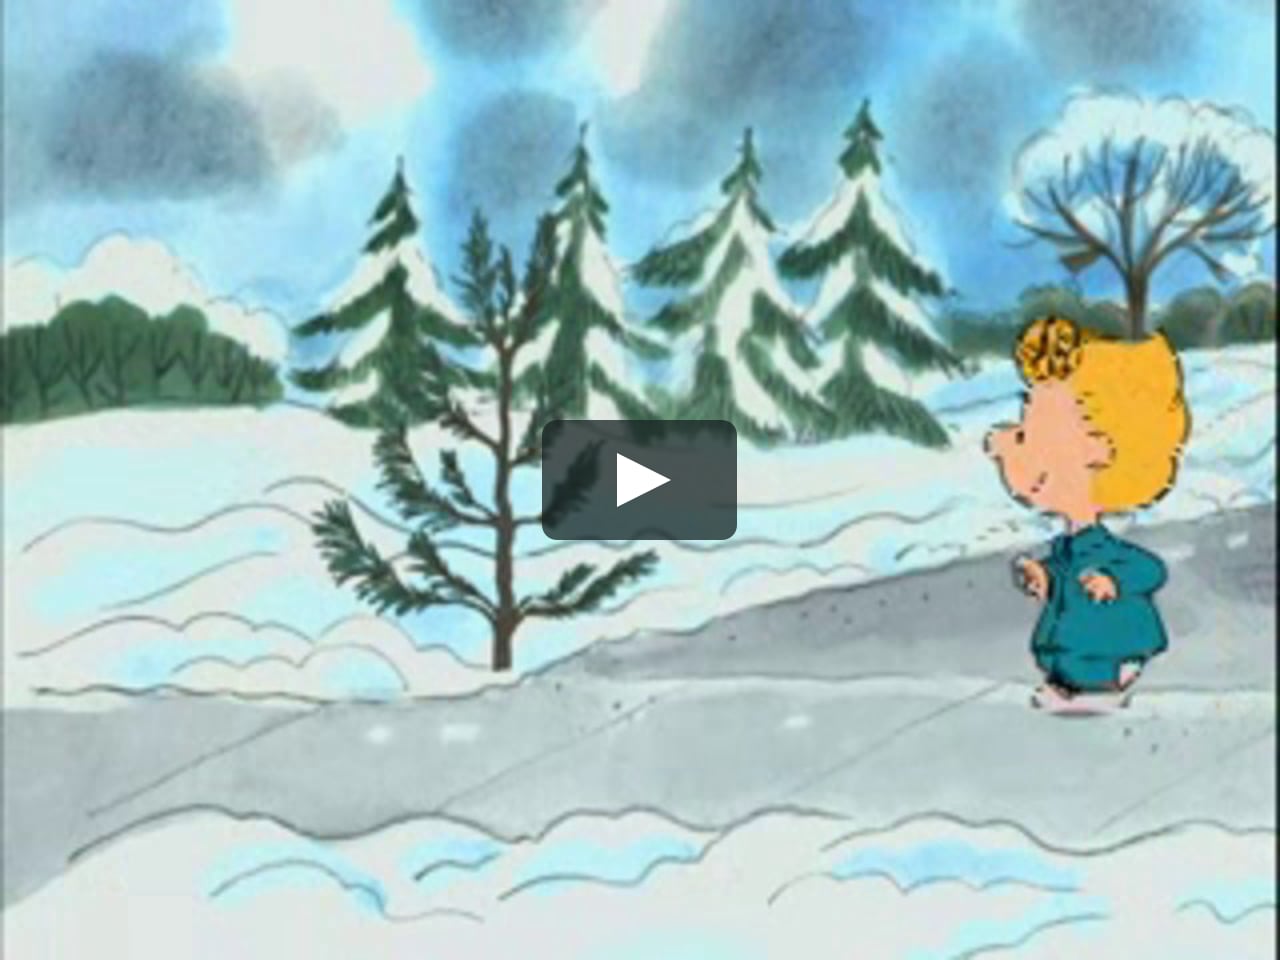 A Charlie Browns Christmas Tales On Vimeo